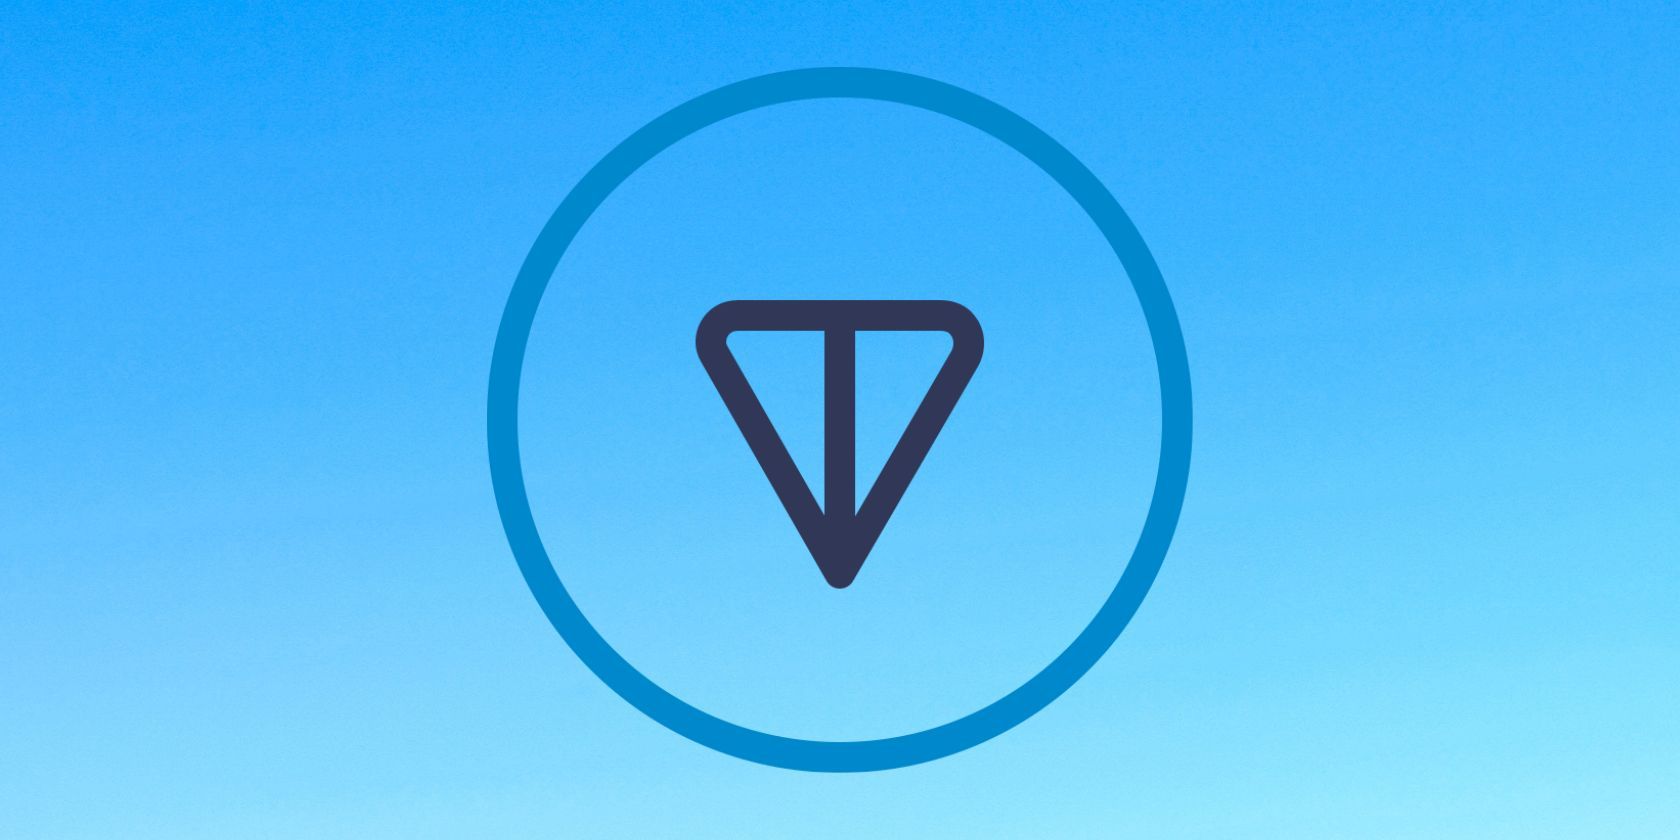 toncoin icon on blue gradient background